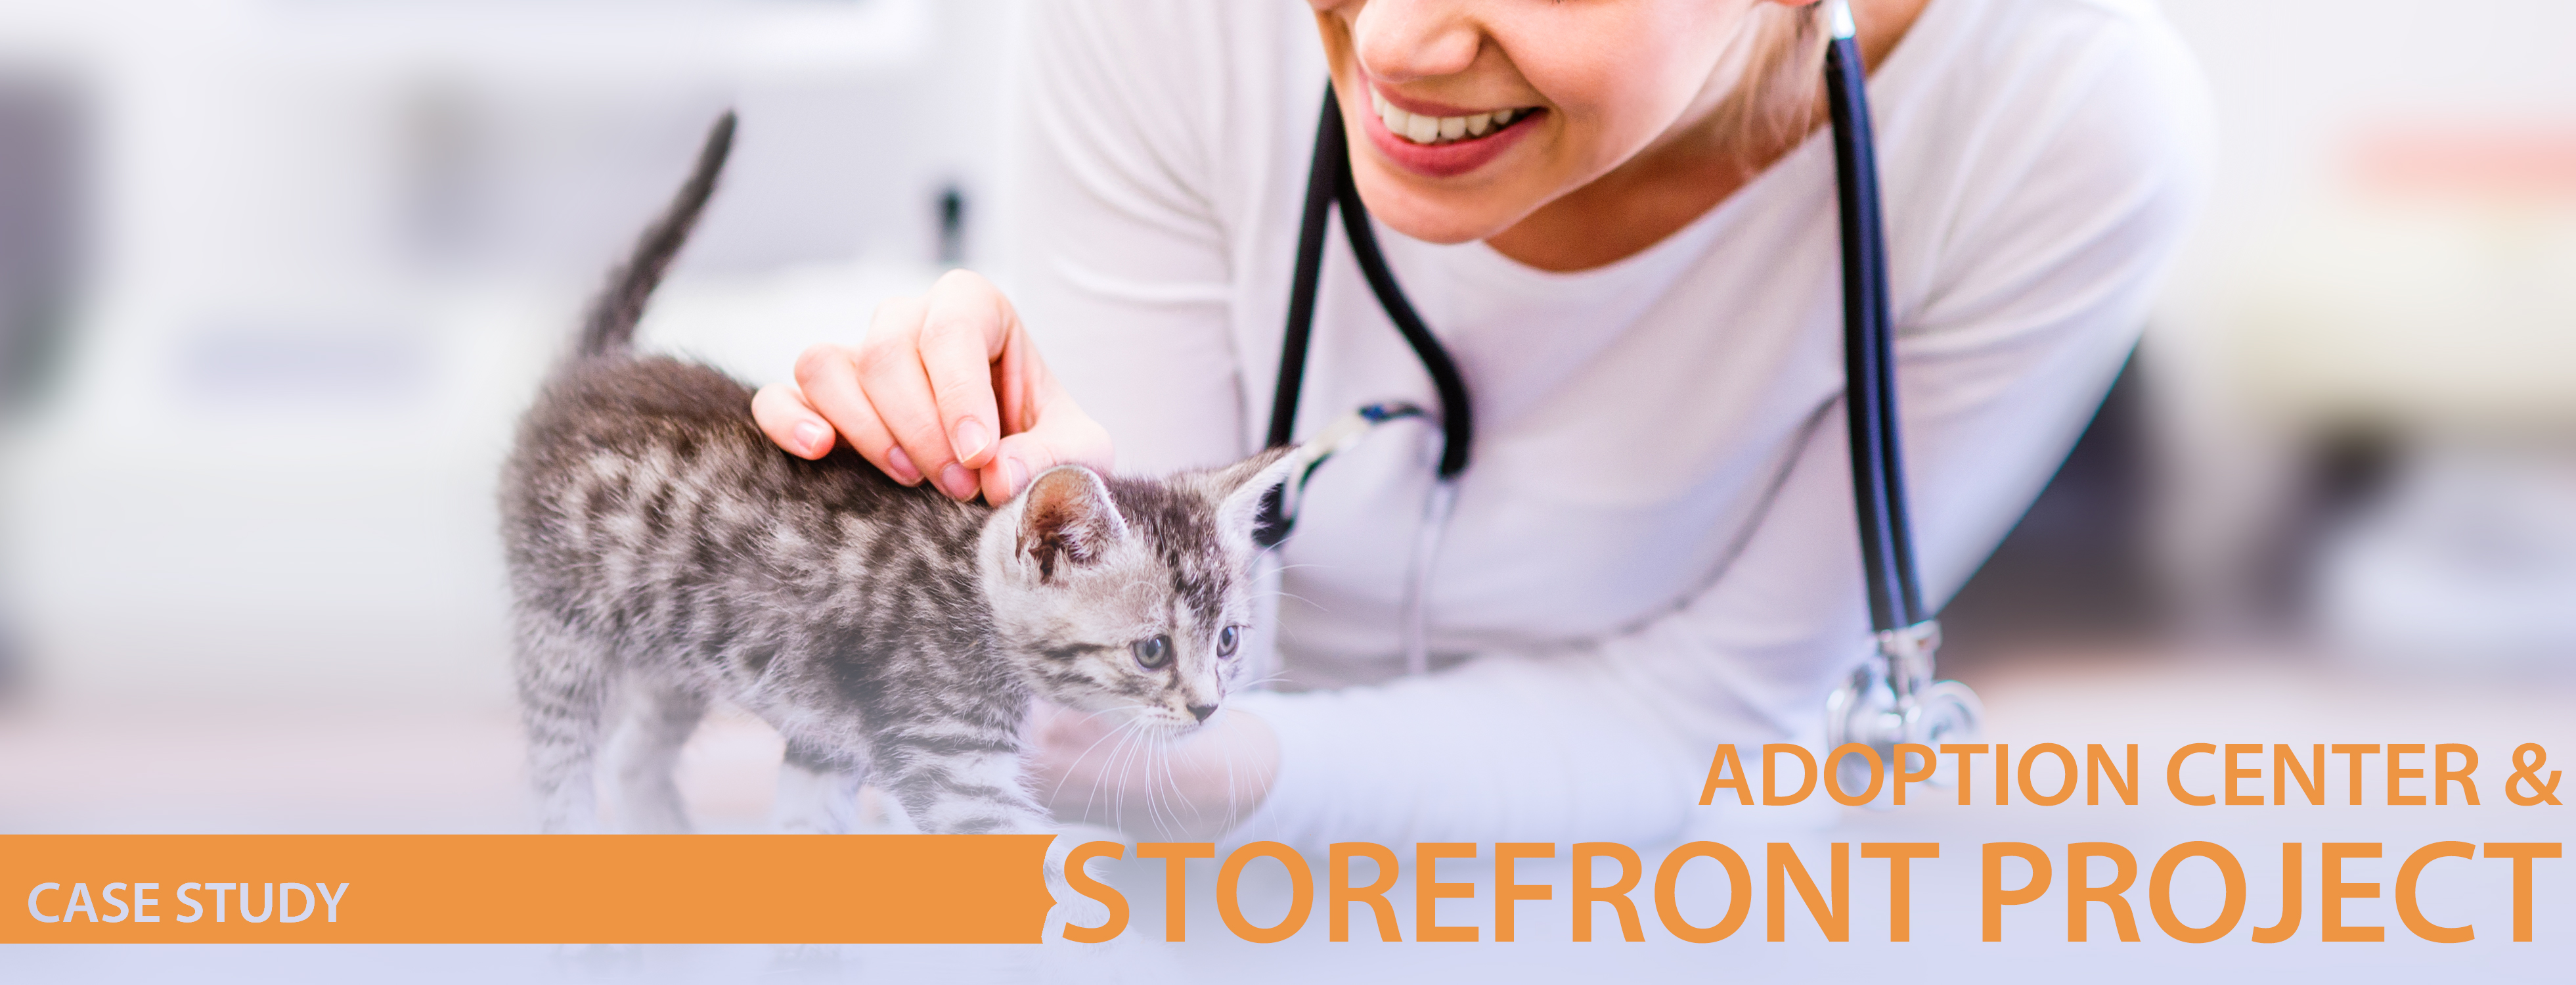 adoption center and storefront project case study header